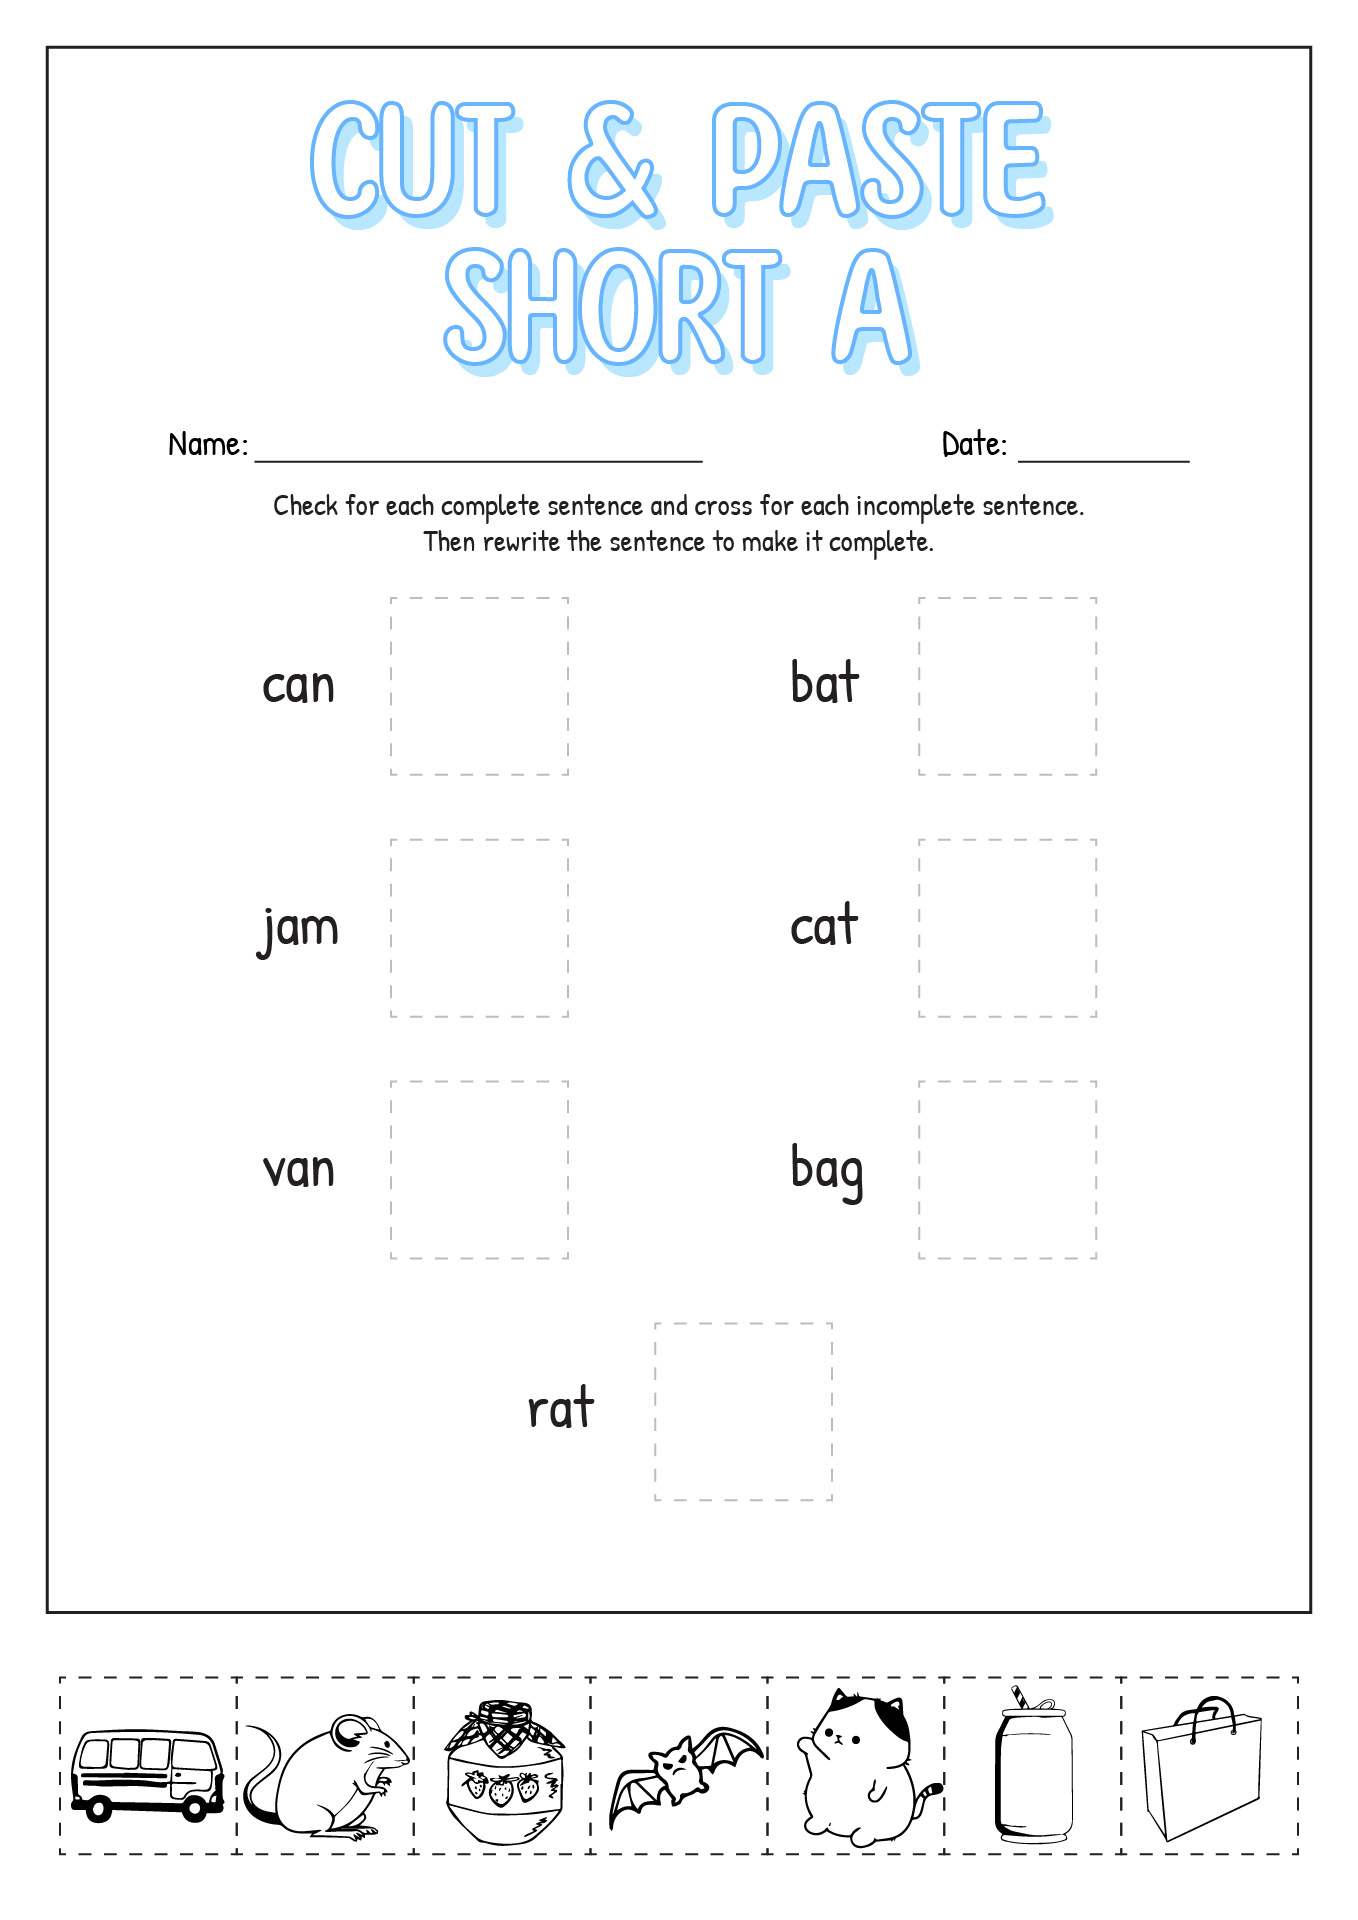 Cut and Paste Short a Worksheets Image